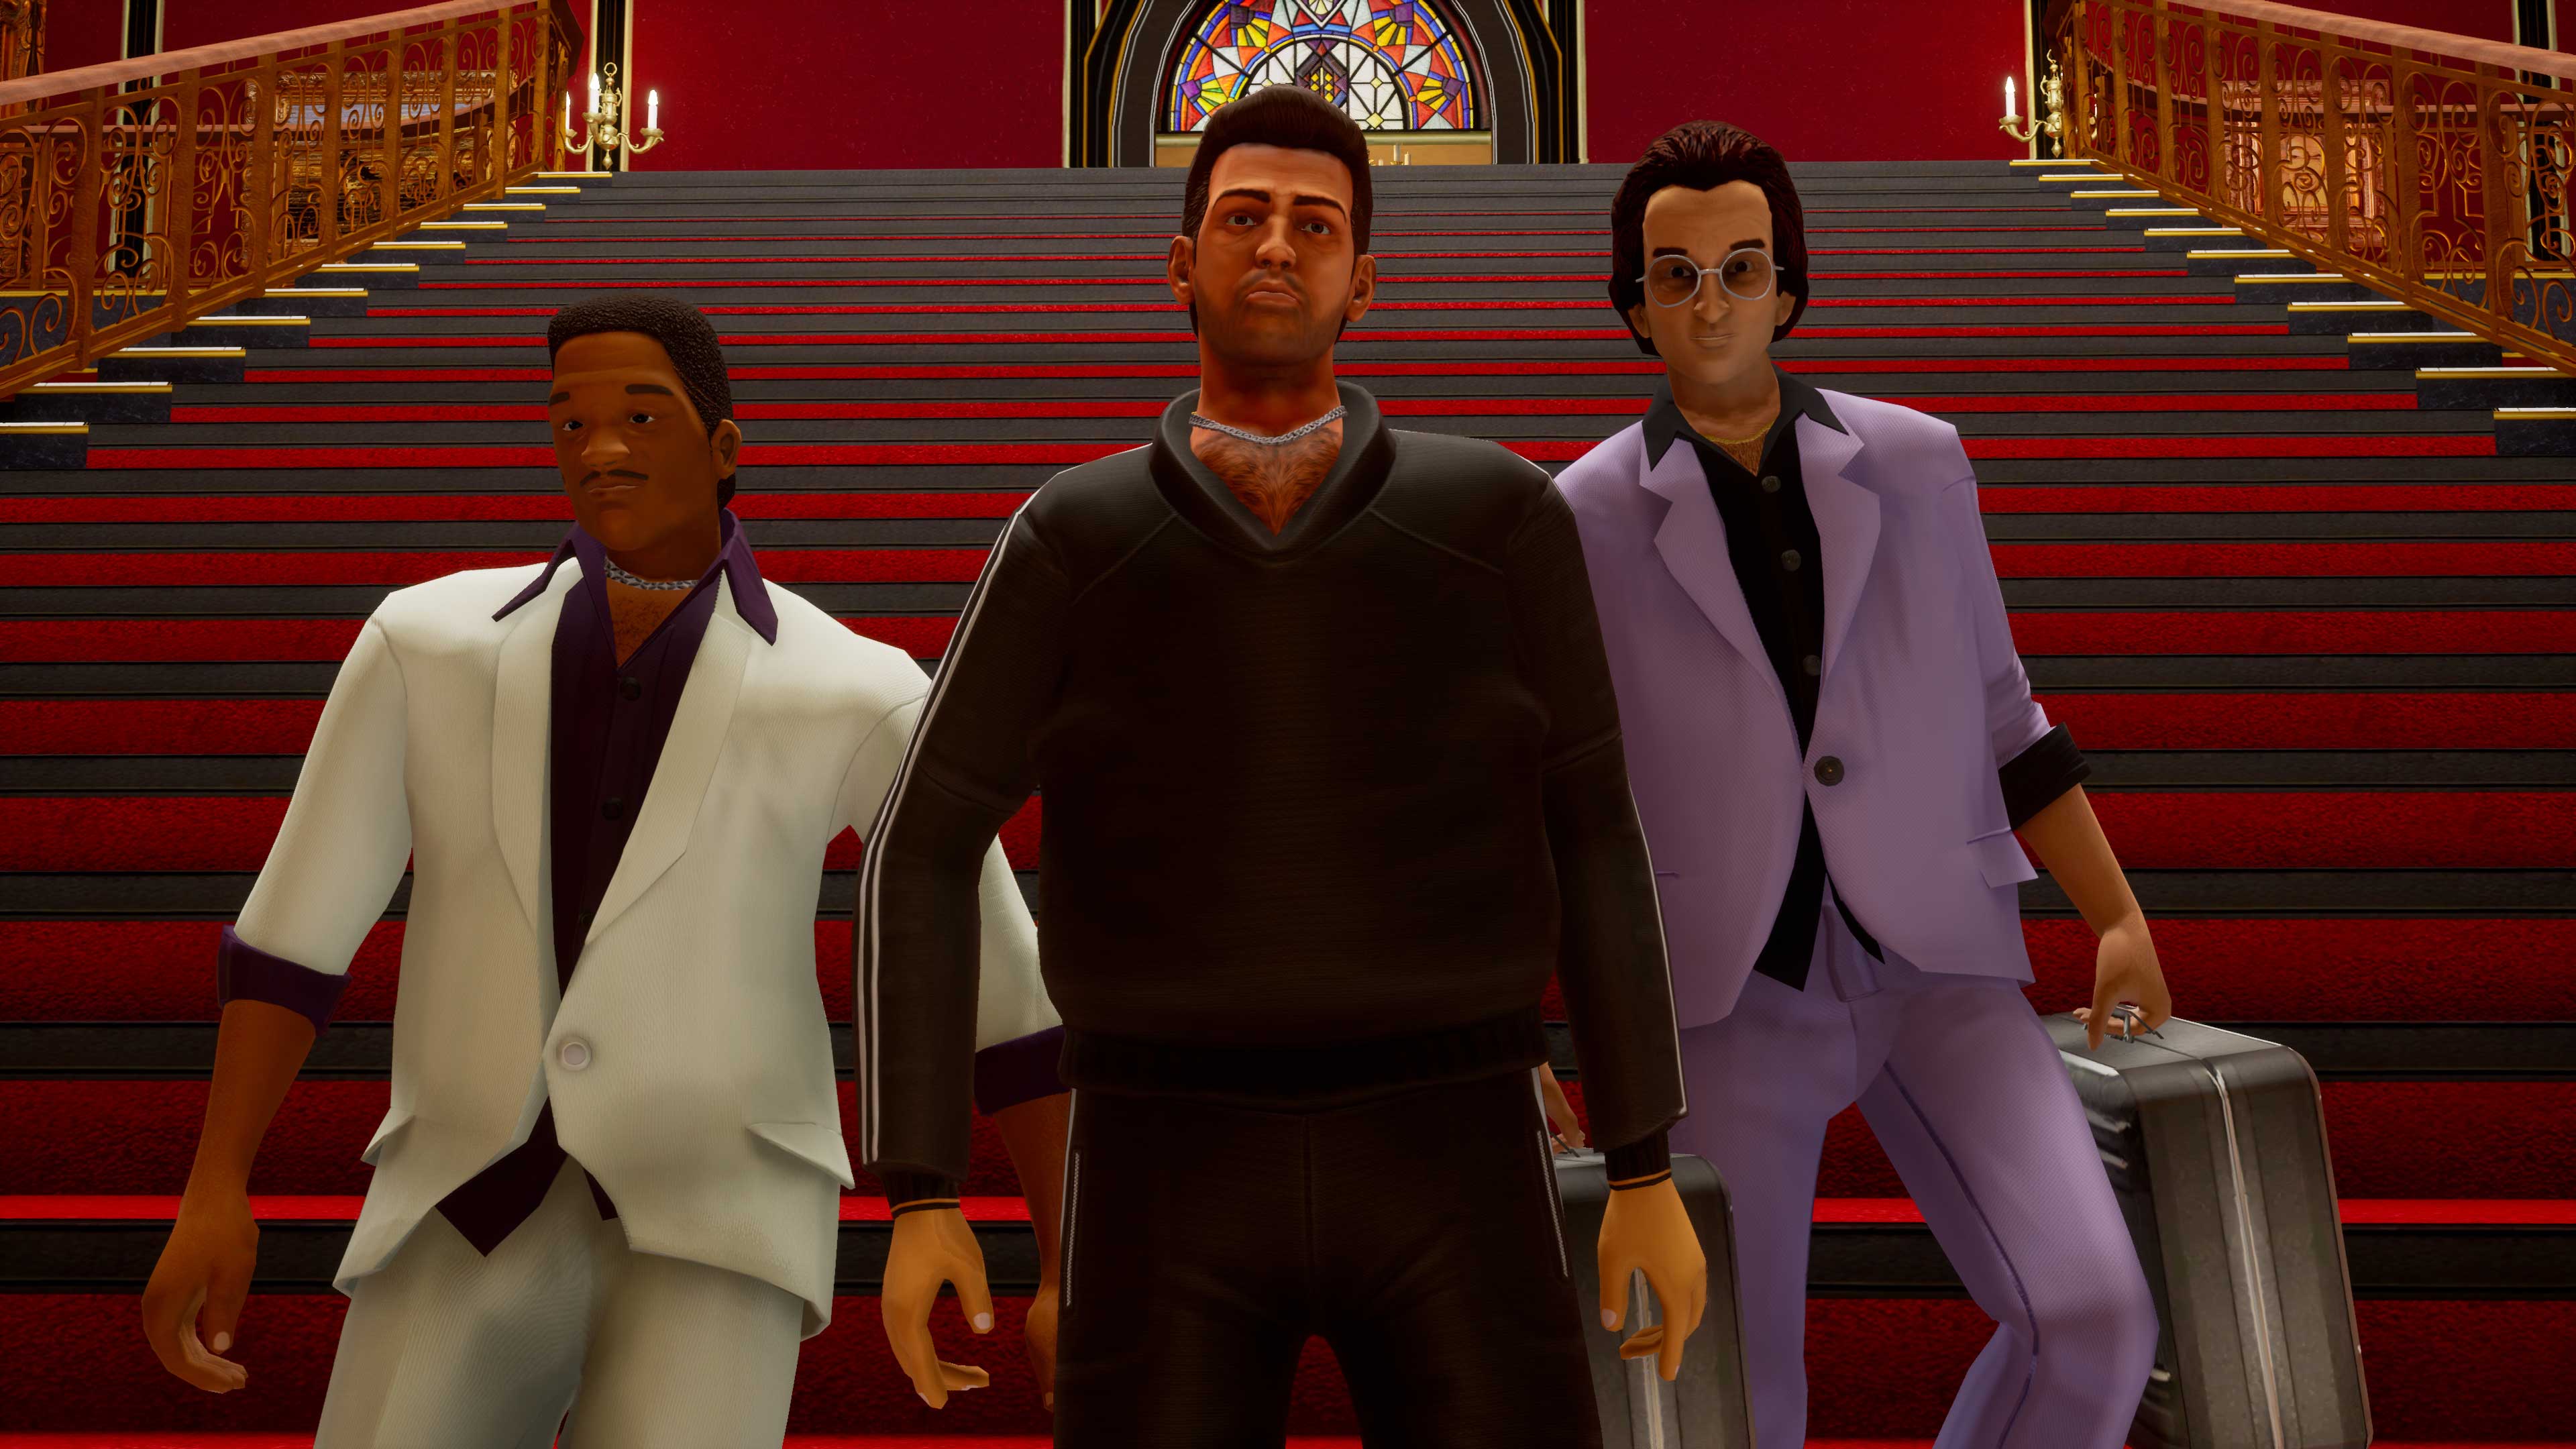 GTA 3 and Vice City reverse-engineering fan project back online after  Take-Two takedown